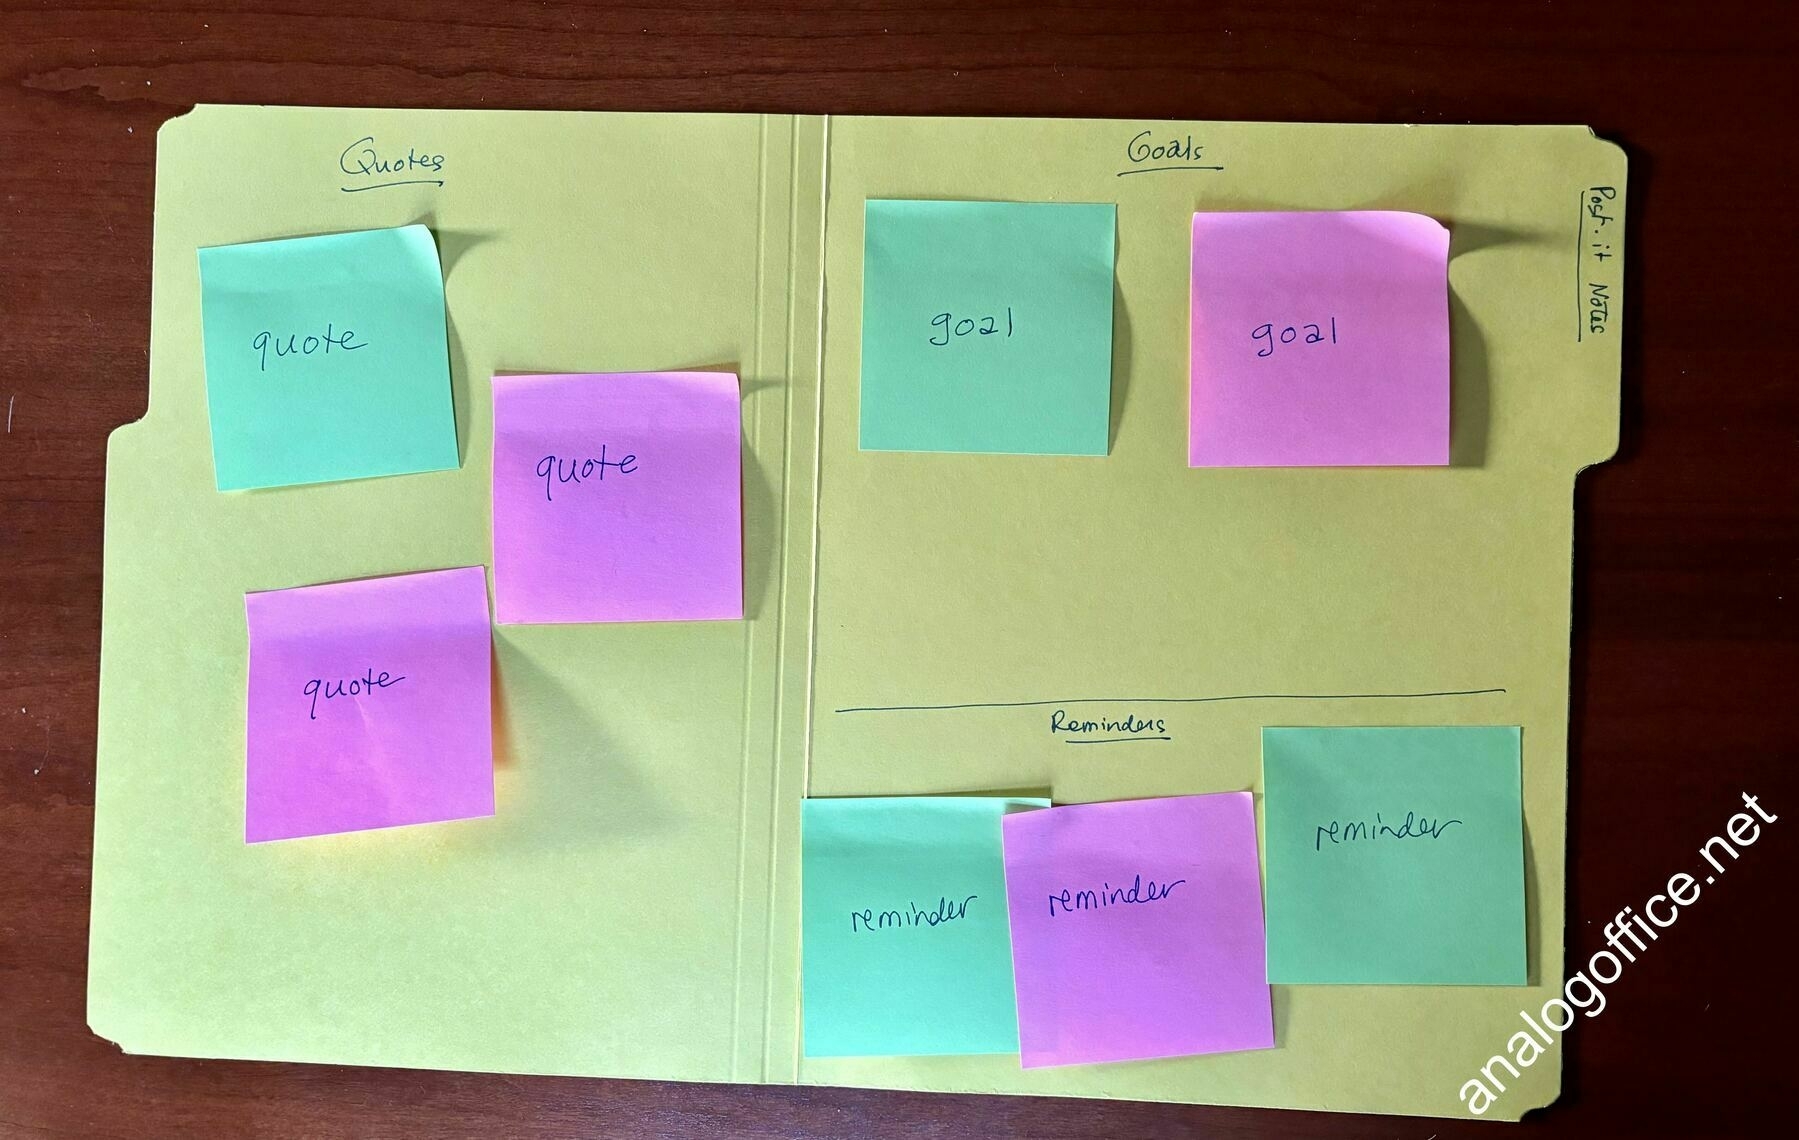 sticky notes in a folder with various sections blocked off for quotes, reminders, goals